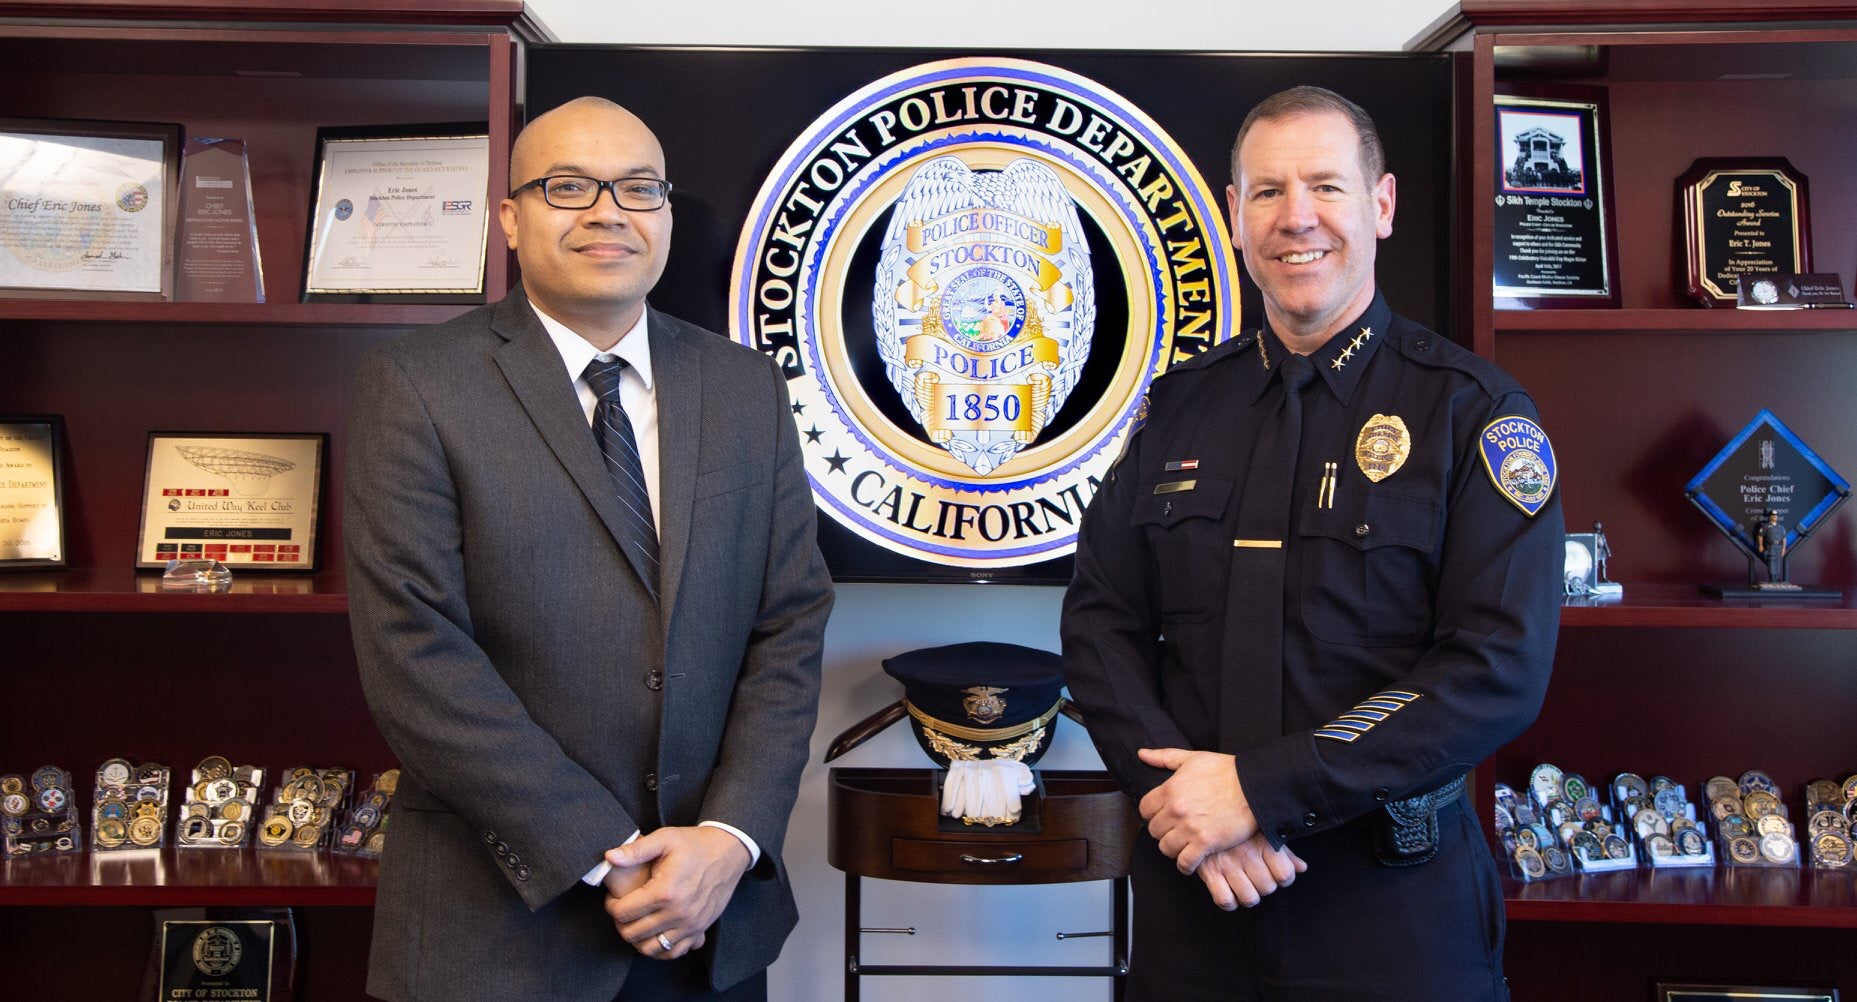 Sinath Vann joins the Stockton Police Department as a Community Service Officer